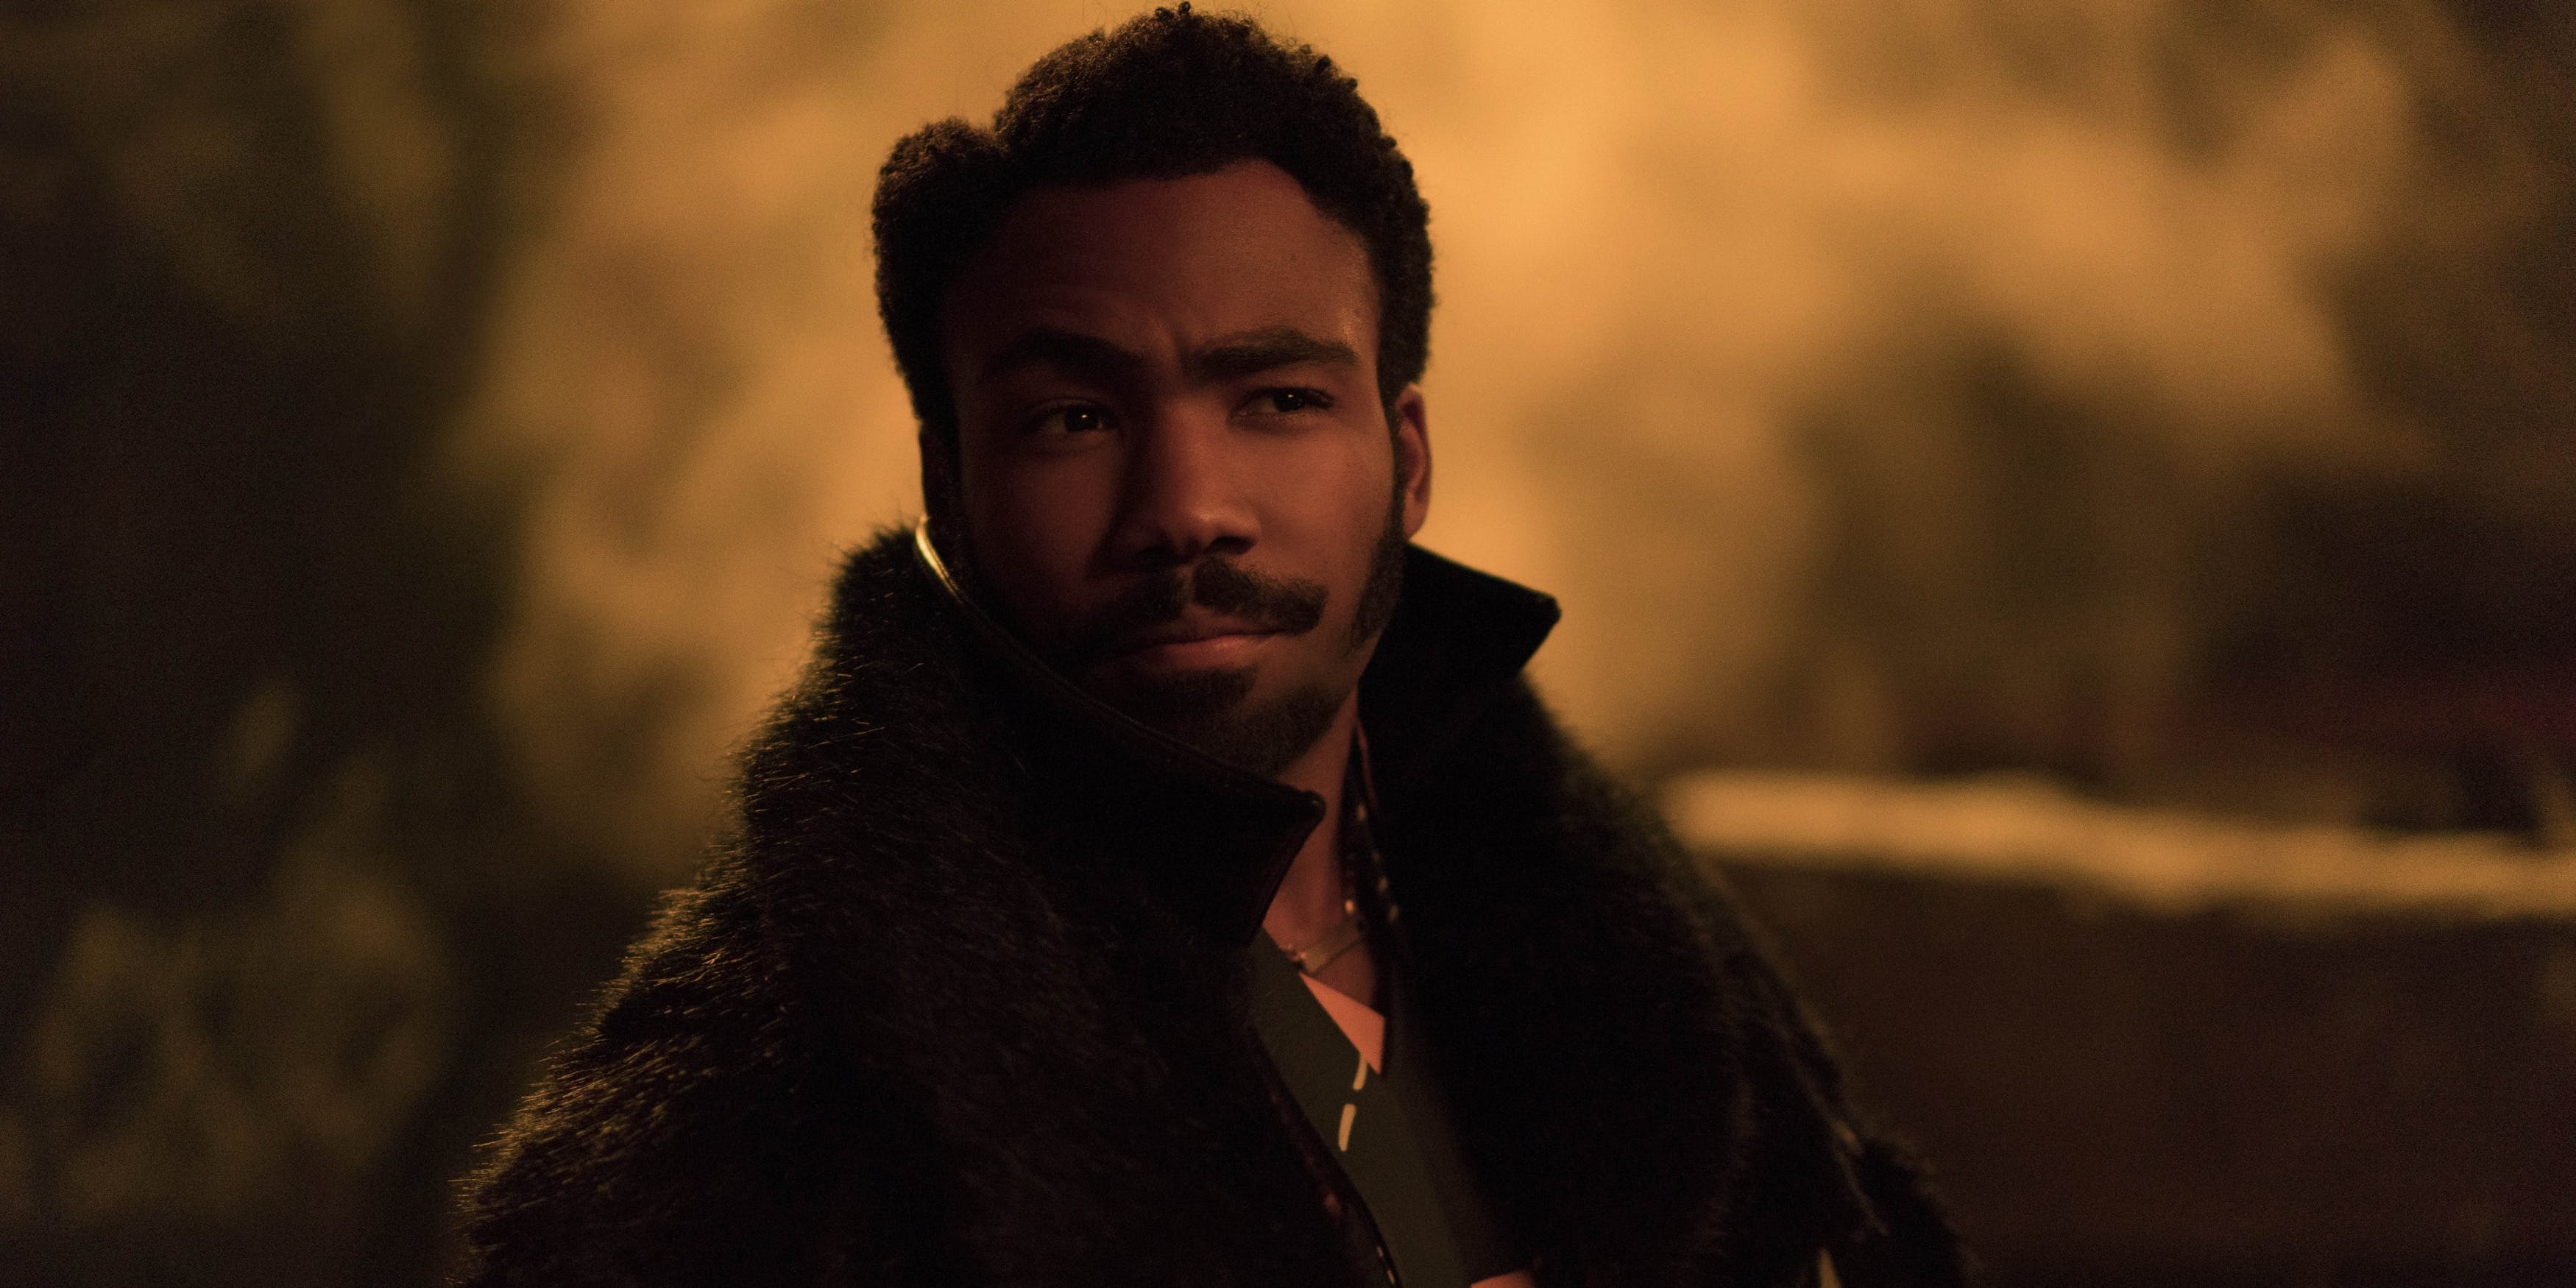 Is Lando Calrissian pansexual? 'Solo' director says yes